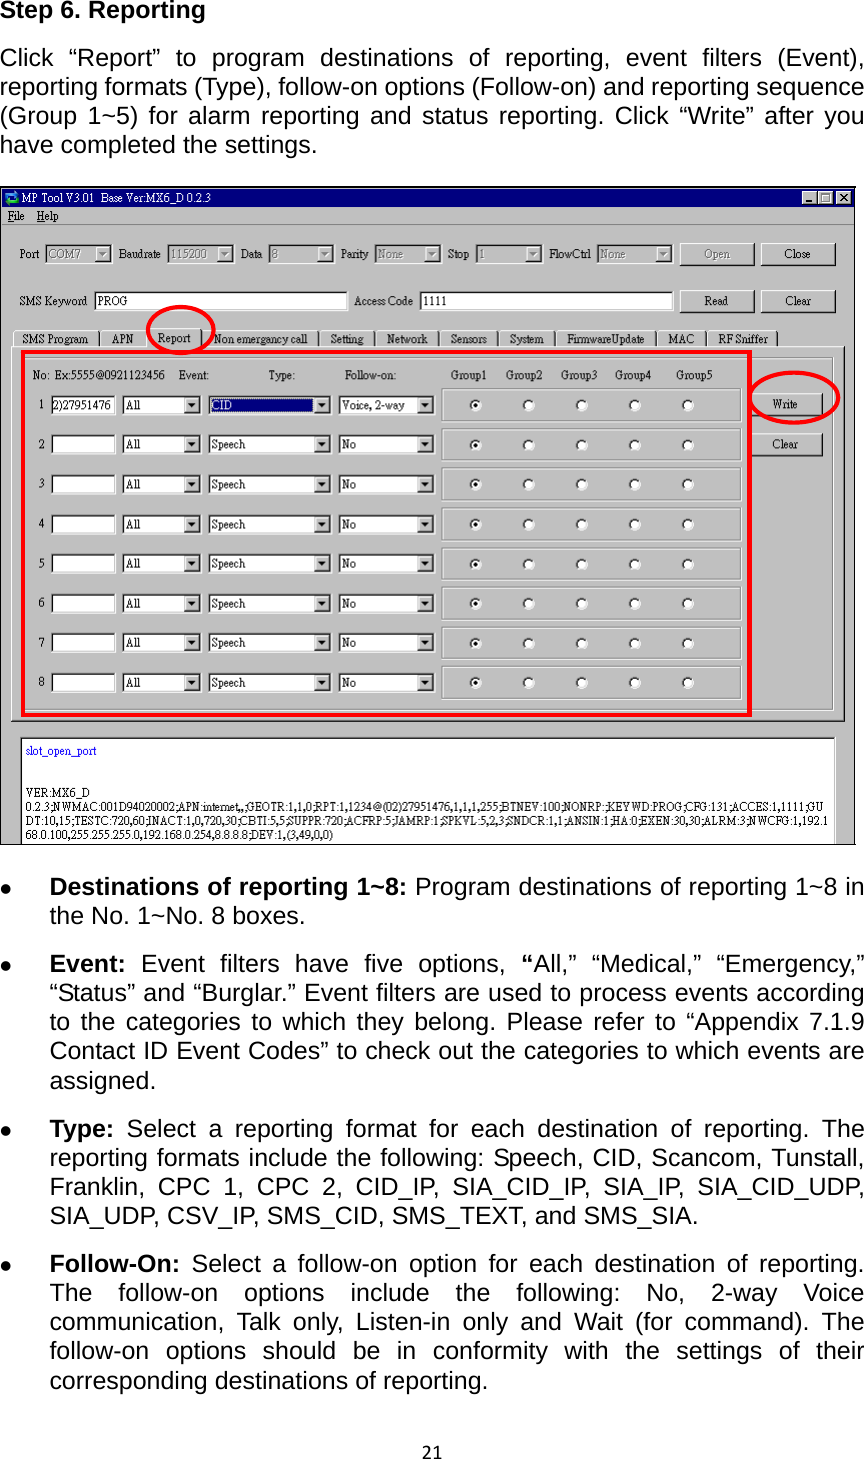 21Step 6. Reporting Click “Report” to program destinations of reporting, event filters (Event), reporting formats (Type), follow-on options (Follow-on) and reporting sequence (Group 1~5) for alarm reporting and status reporting. Click “Write” after you have completed the settings. z Destinations of reporting 1~8: Program destinations of reporting 1~8 in the No. 1~No. 8 boxes. z Event:  Event filters have five options, “All,” “Medical,” “Emergency,” “Status” and “Burglar.” Event filters are used to process events according to the categories to which they belong. Please refer to “Appendix 7.1.9 Contact ID Event Codes” to check out the categories to which events are assigned.    z Type:  Select a reporting format for each destination of reporting. The reporting formats include the following: Speech, CID, Scancom, Tunstall, Franklin, CPC 1, CPC 2, CID_IP, SIA_CID_IP, SIA_IP, SIA_CID_UDP, SIA_UDP, CSV_IP, SMS_CID, SMS_TEXT, and SMS_SIA.     z Follow-On: Select a follow-on option for each destination of reporting. The follow-on options include the following: No, 2-way Voice communication, Talk only, Listen-in only and Wait (for command). The follow-on options should be in conformity with the settings of their corresponding destinations of reporting. 